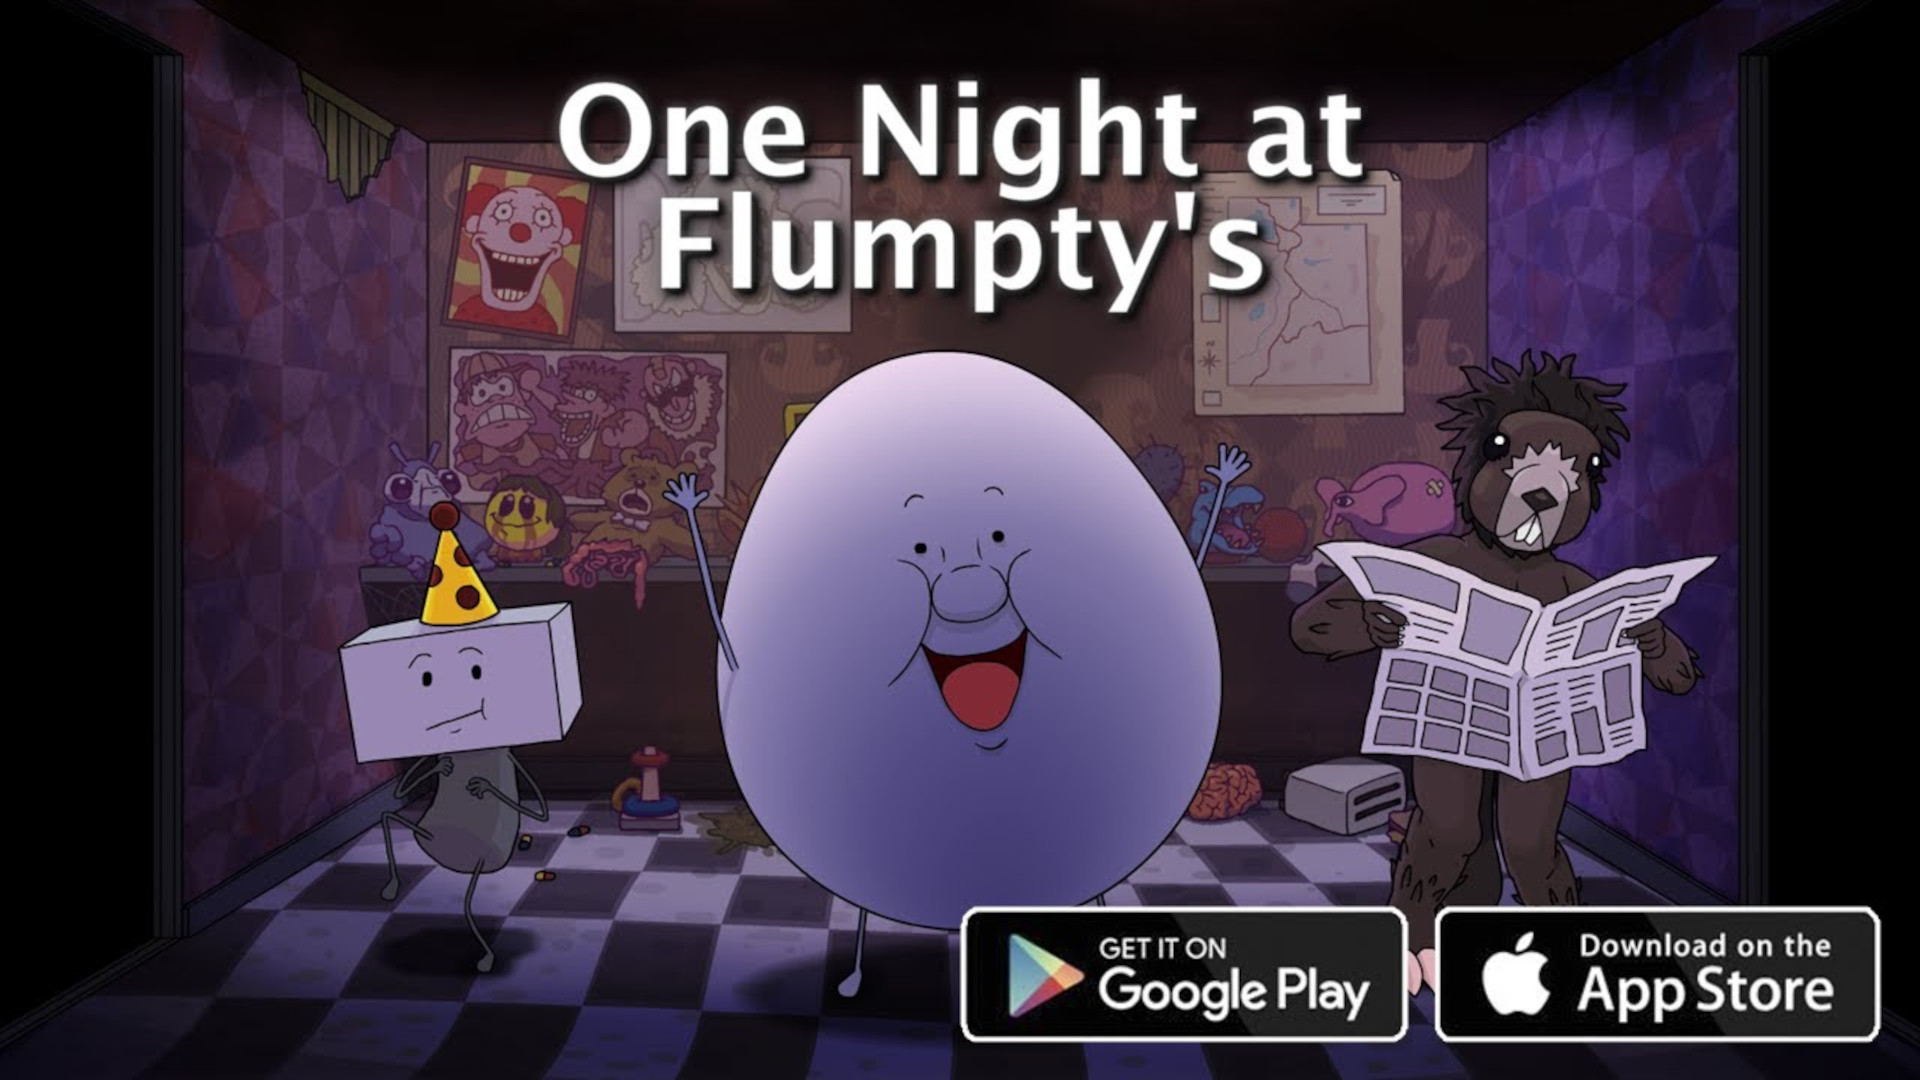 One Night At Flumpty's 3 Fan Made Free Download 